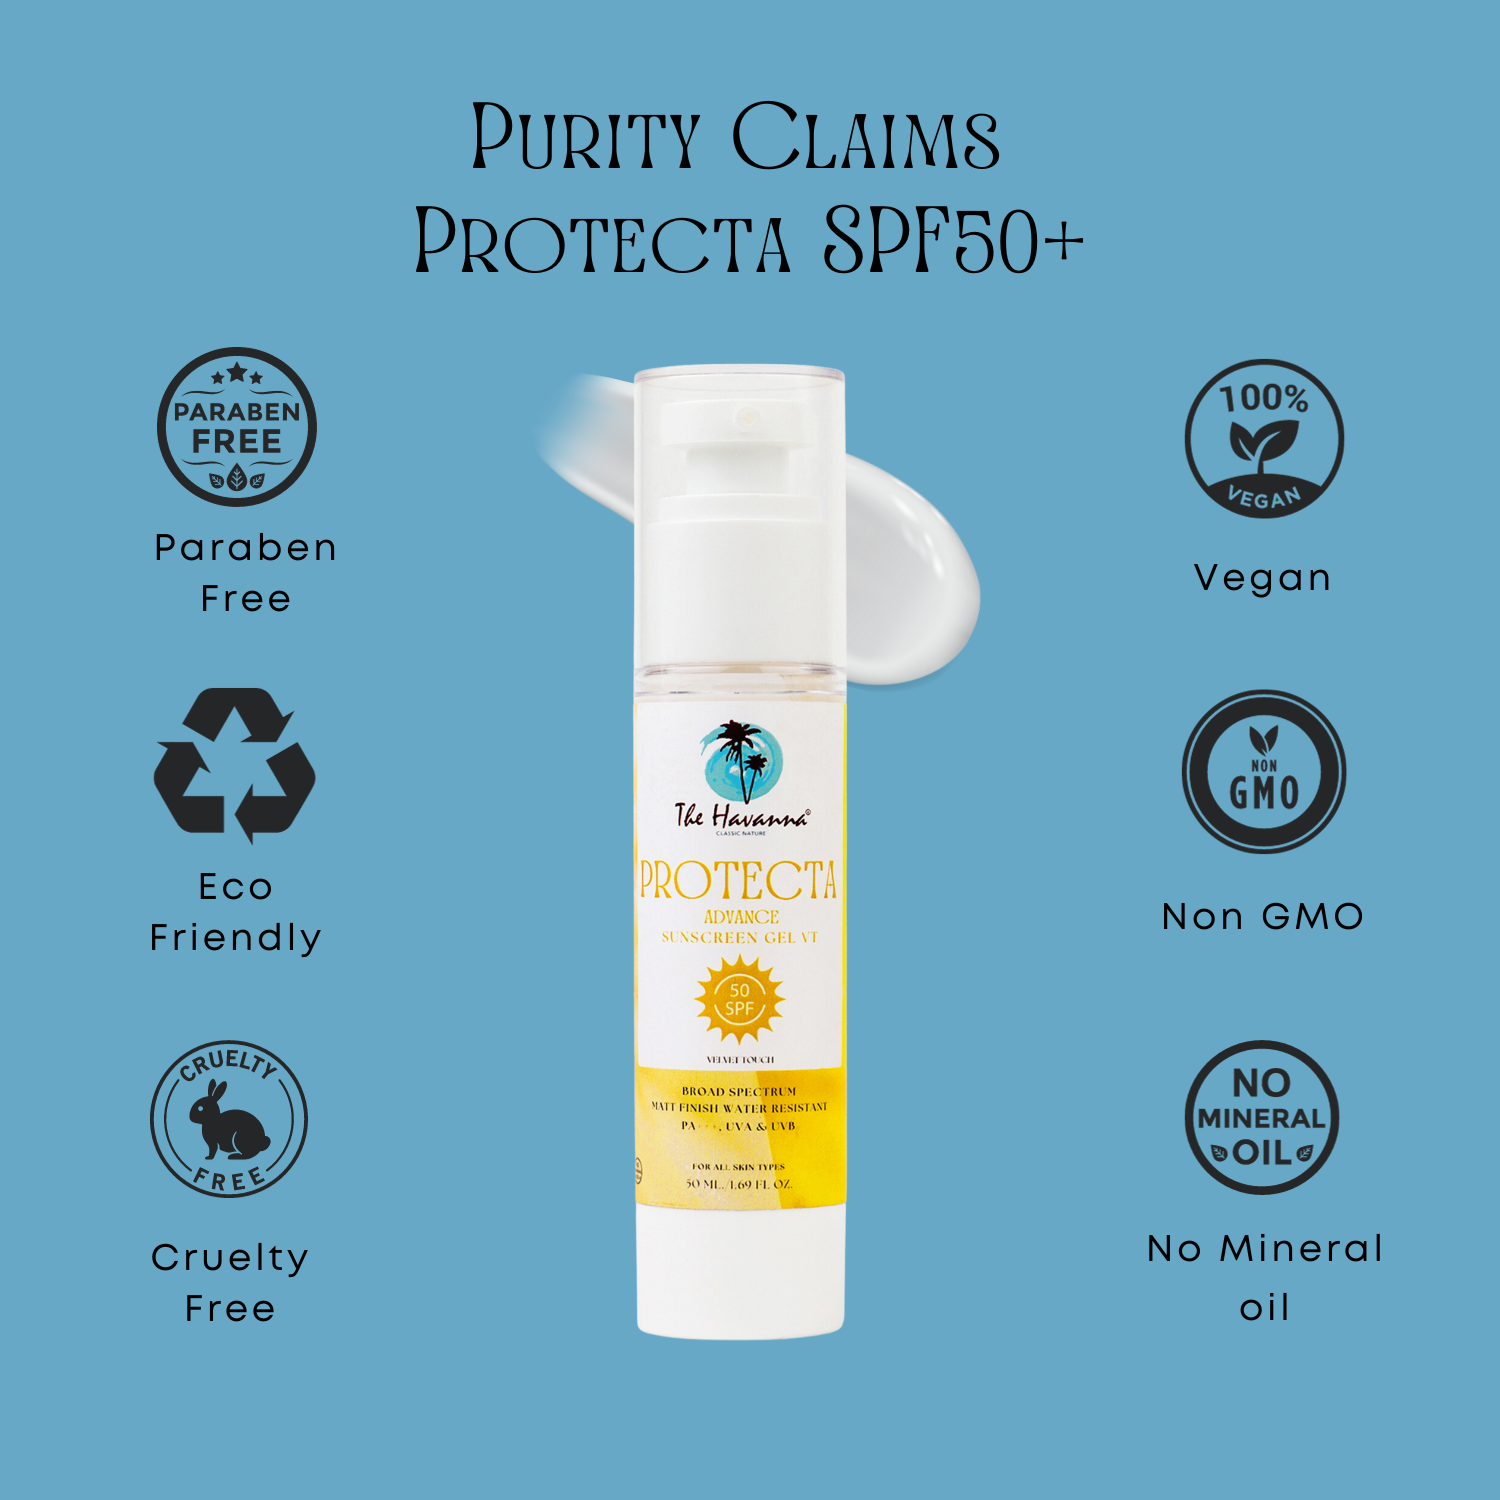 purity claims protecta spf 50+